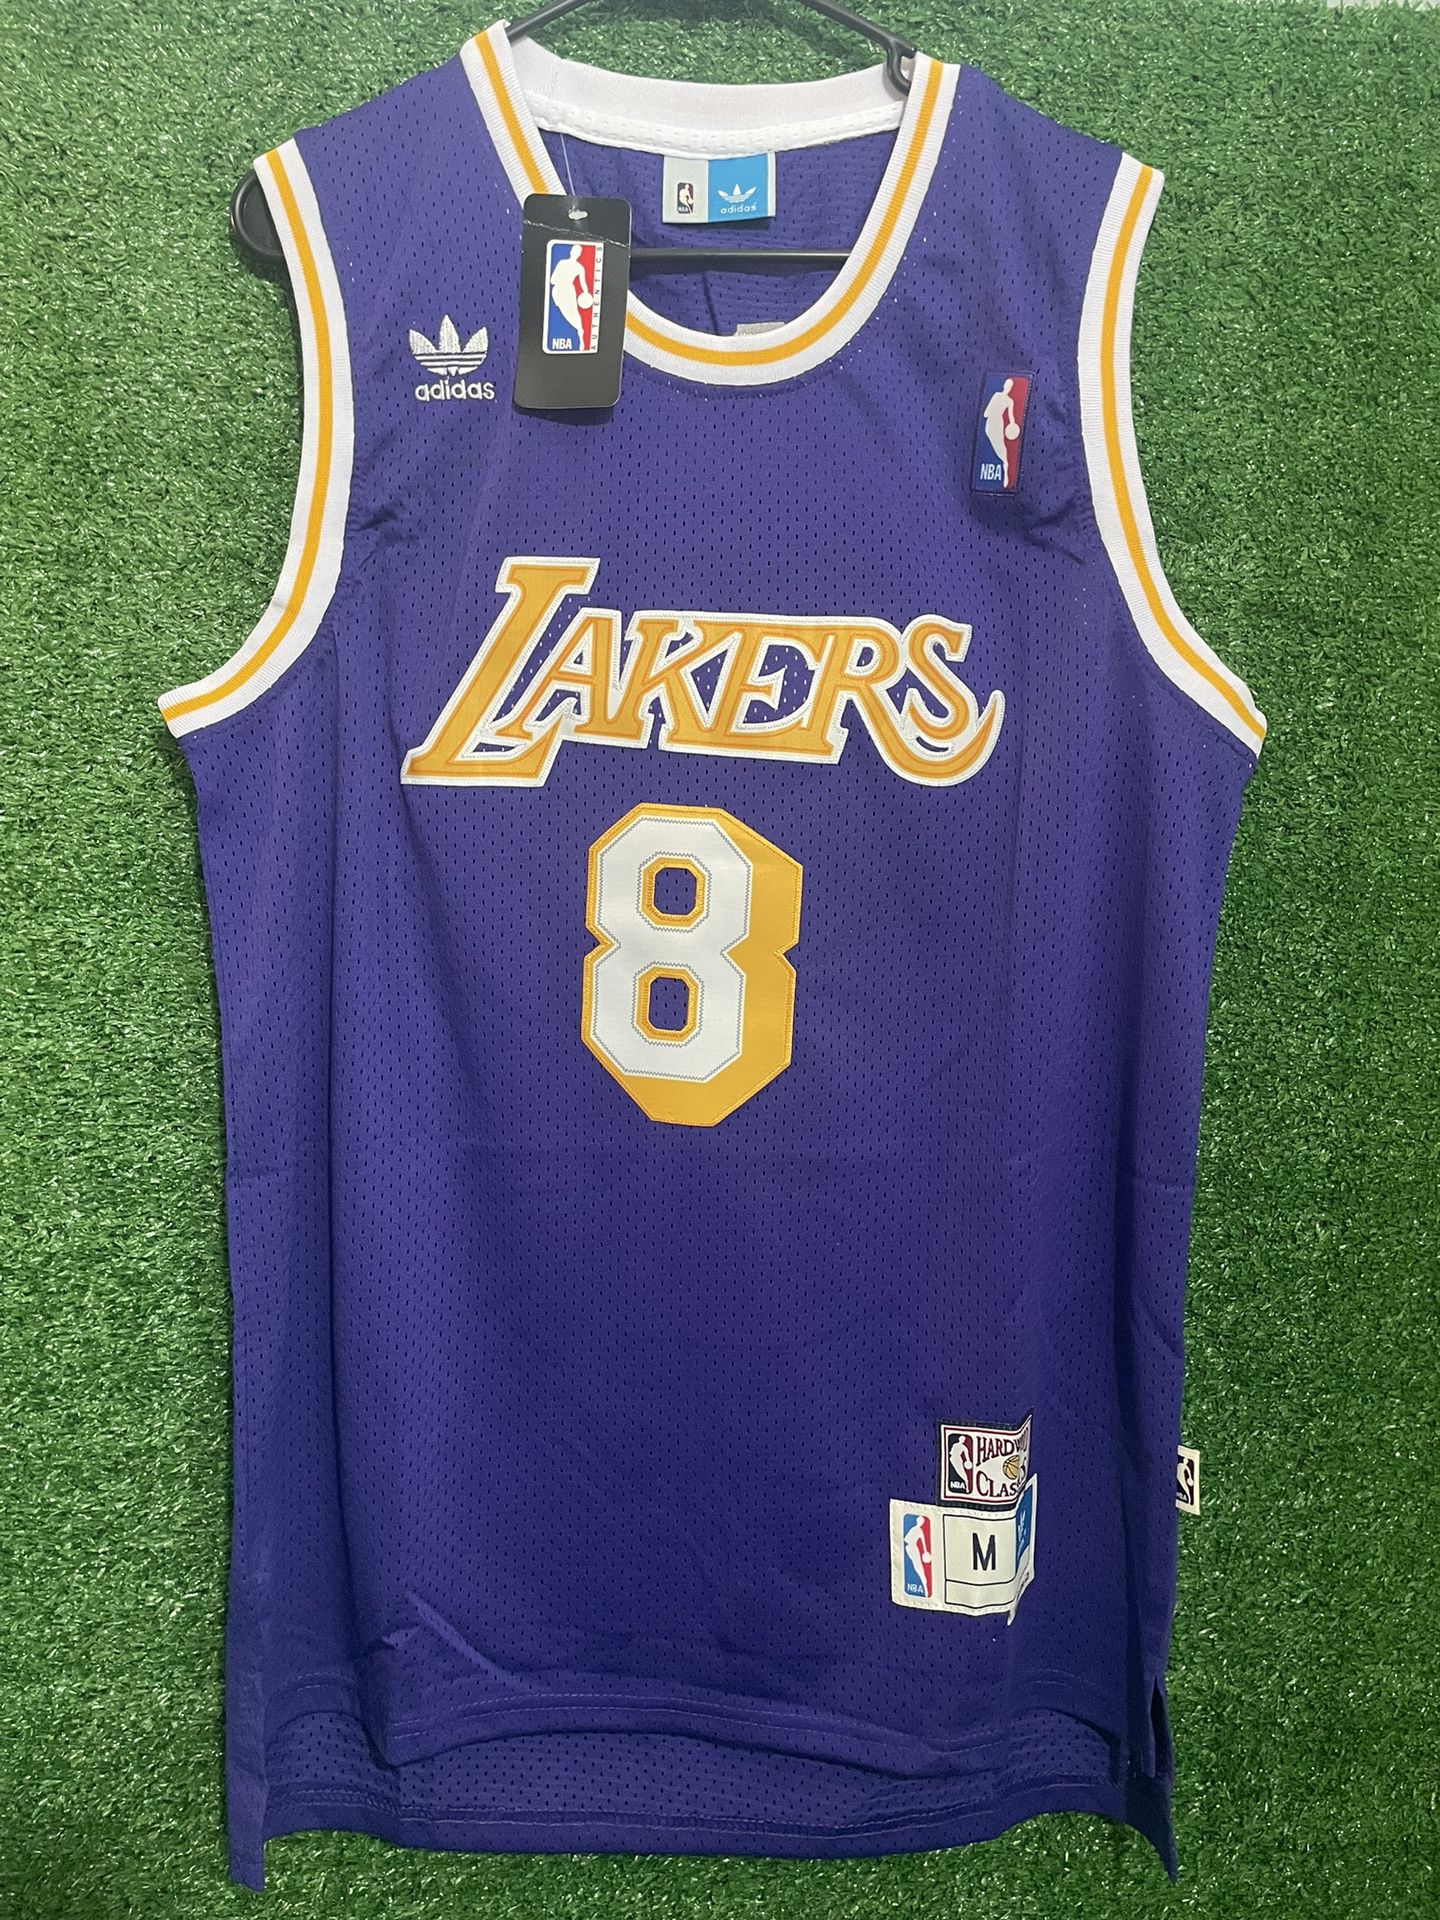 KOBE BRYANT LOS ANGELES LAKERS VINTAGE ADIDAS JERSEY BRAND NEW WITH TAGS SIZES MEDIUM AND LARGE AVAILABLE 